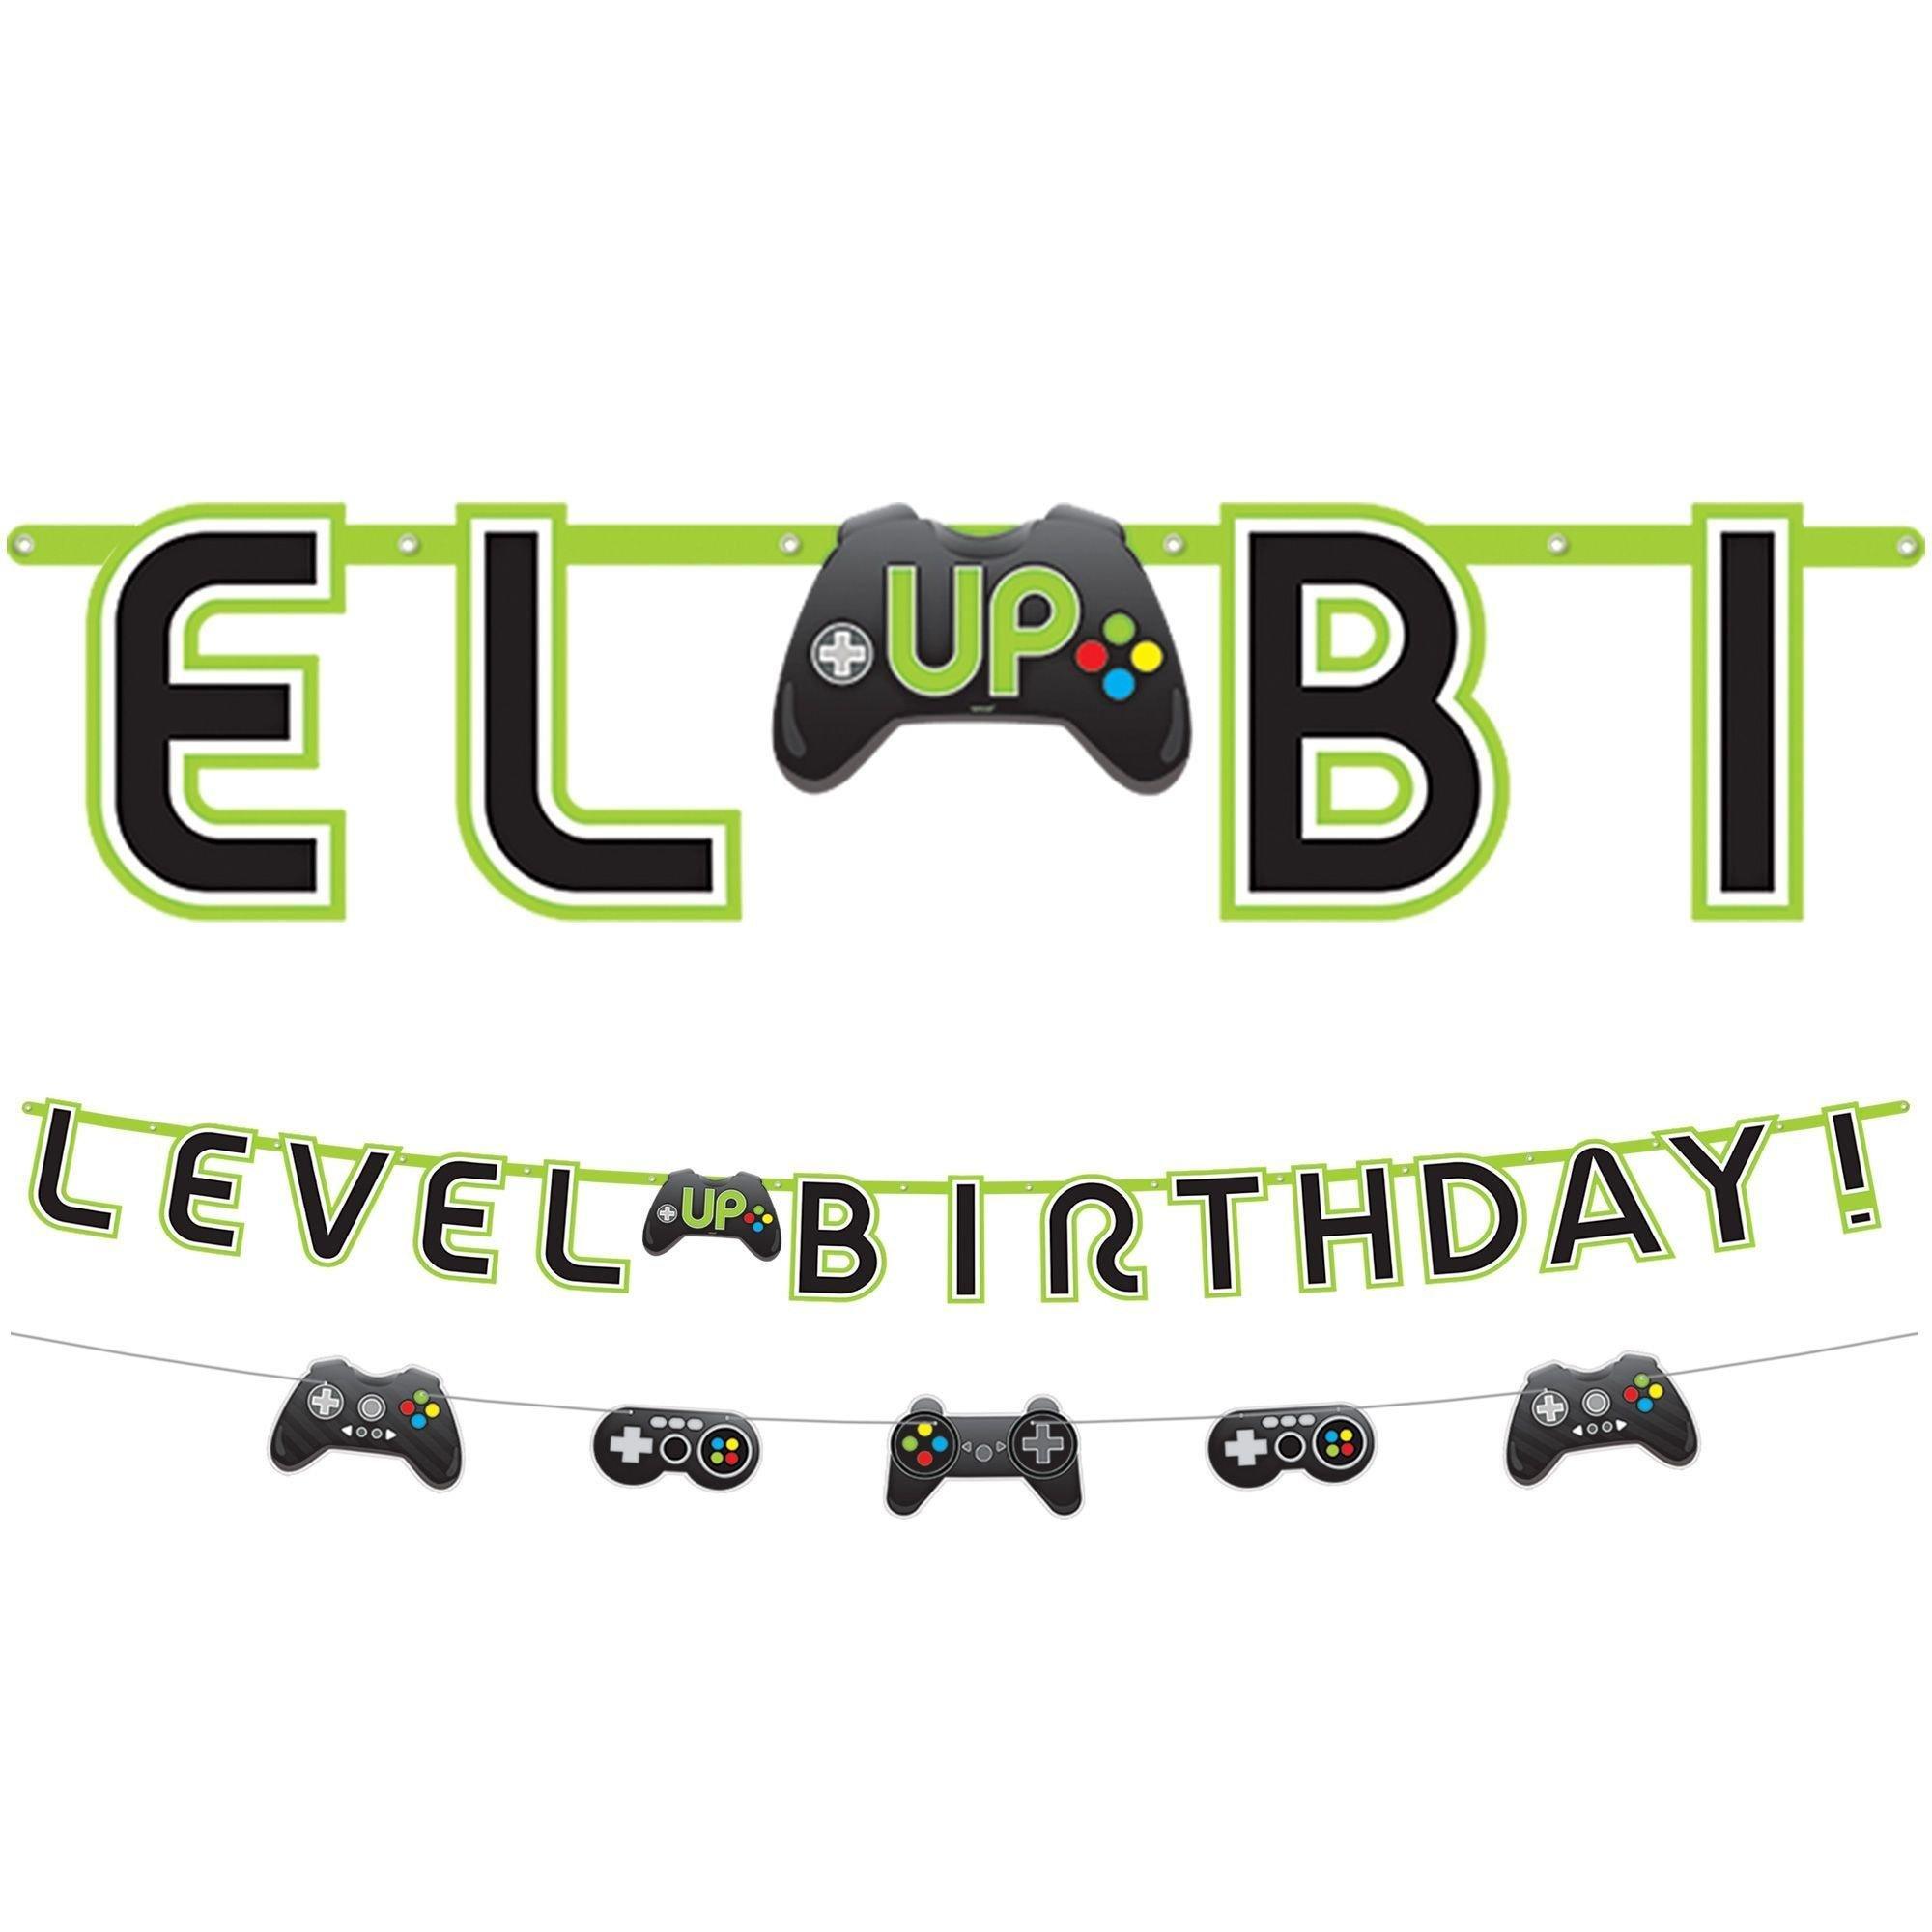 Level Up Birthday Party Kit for 8 - Gamer Plates, Napkins, Cups & Banner